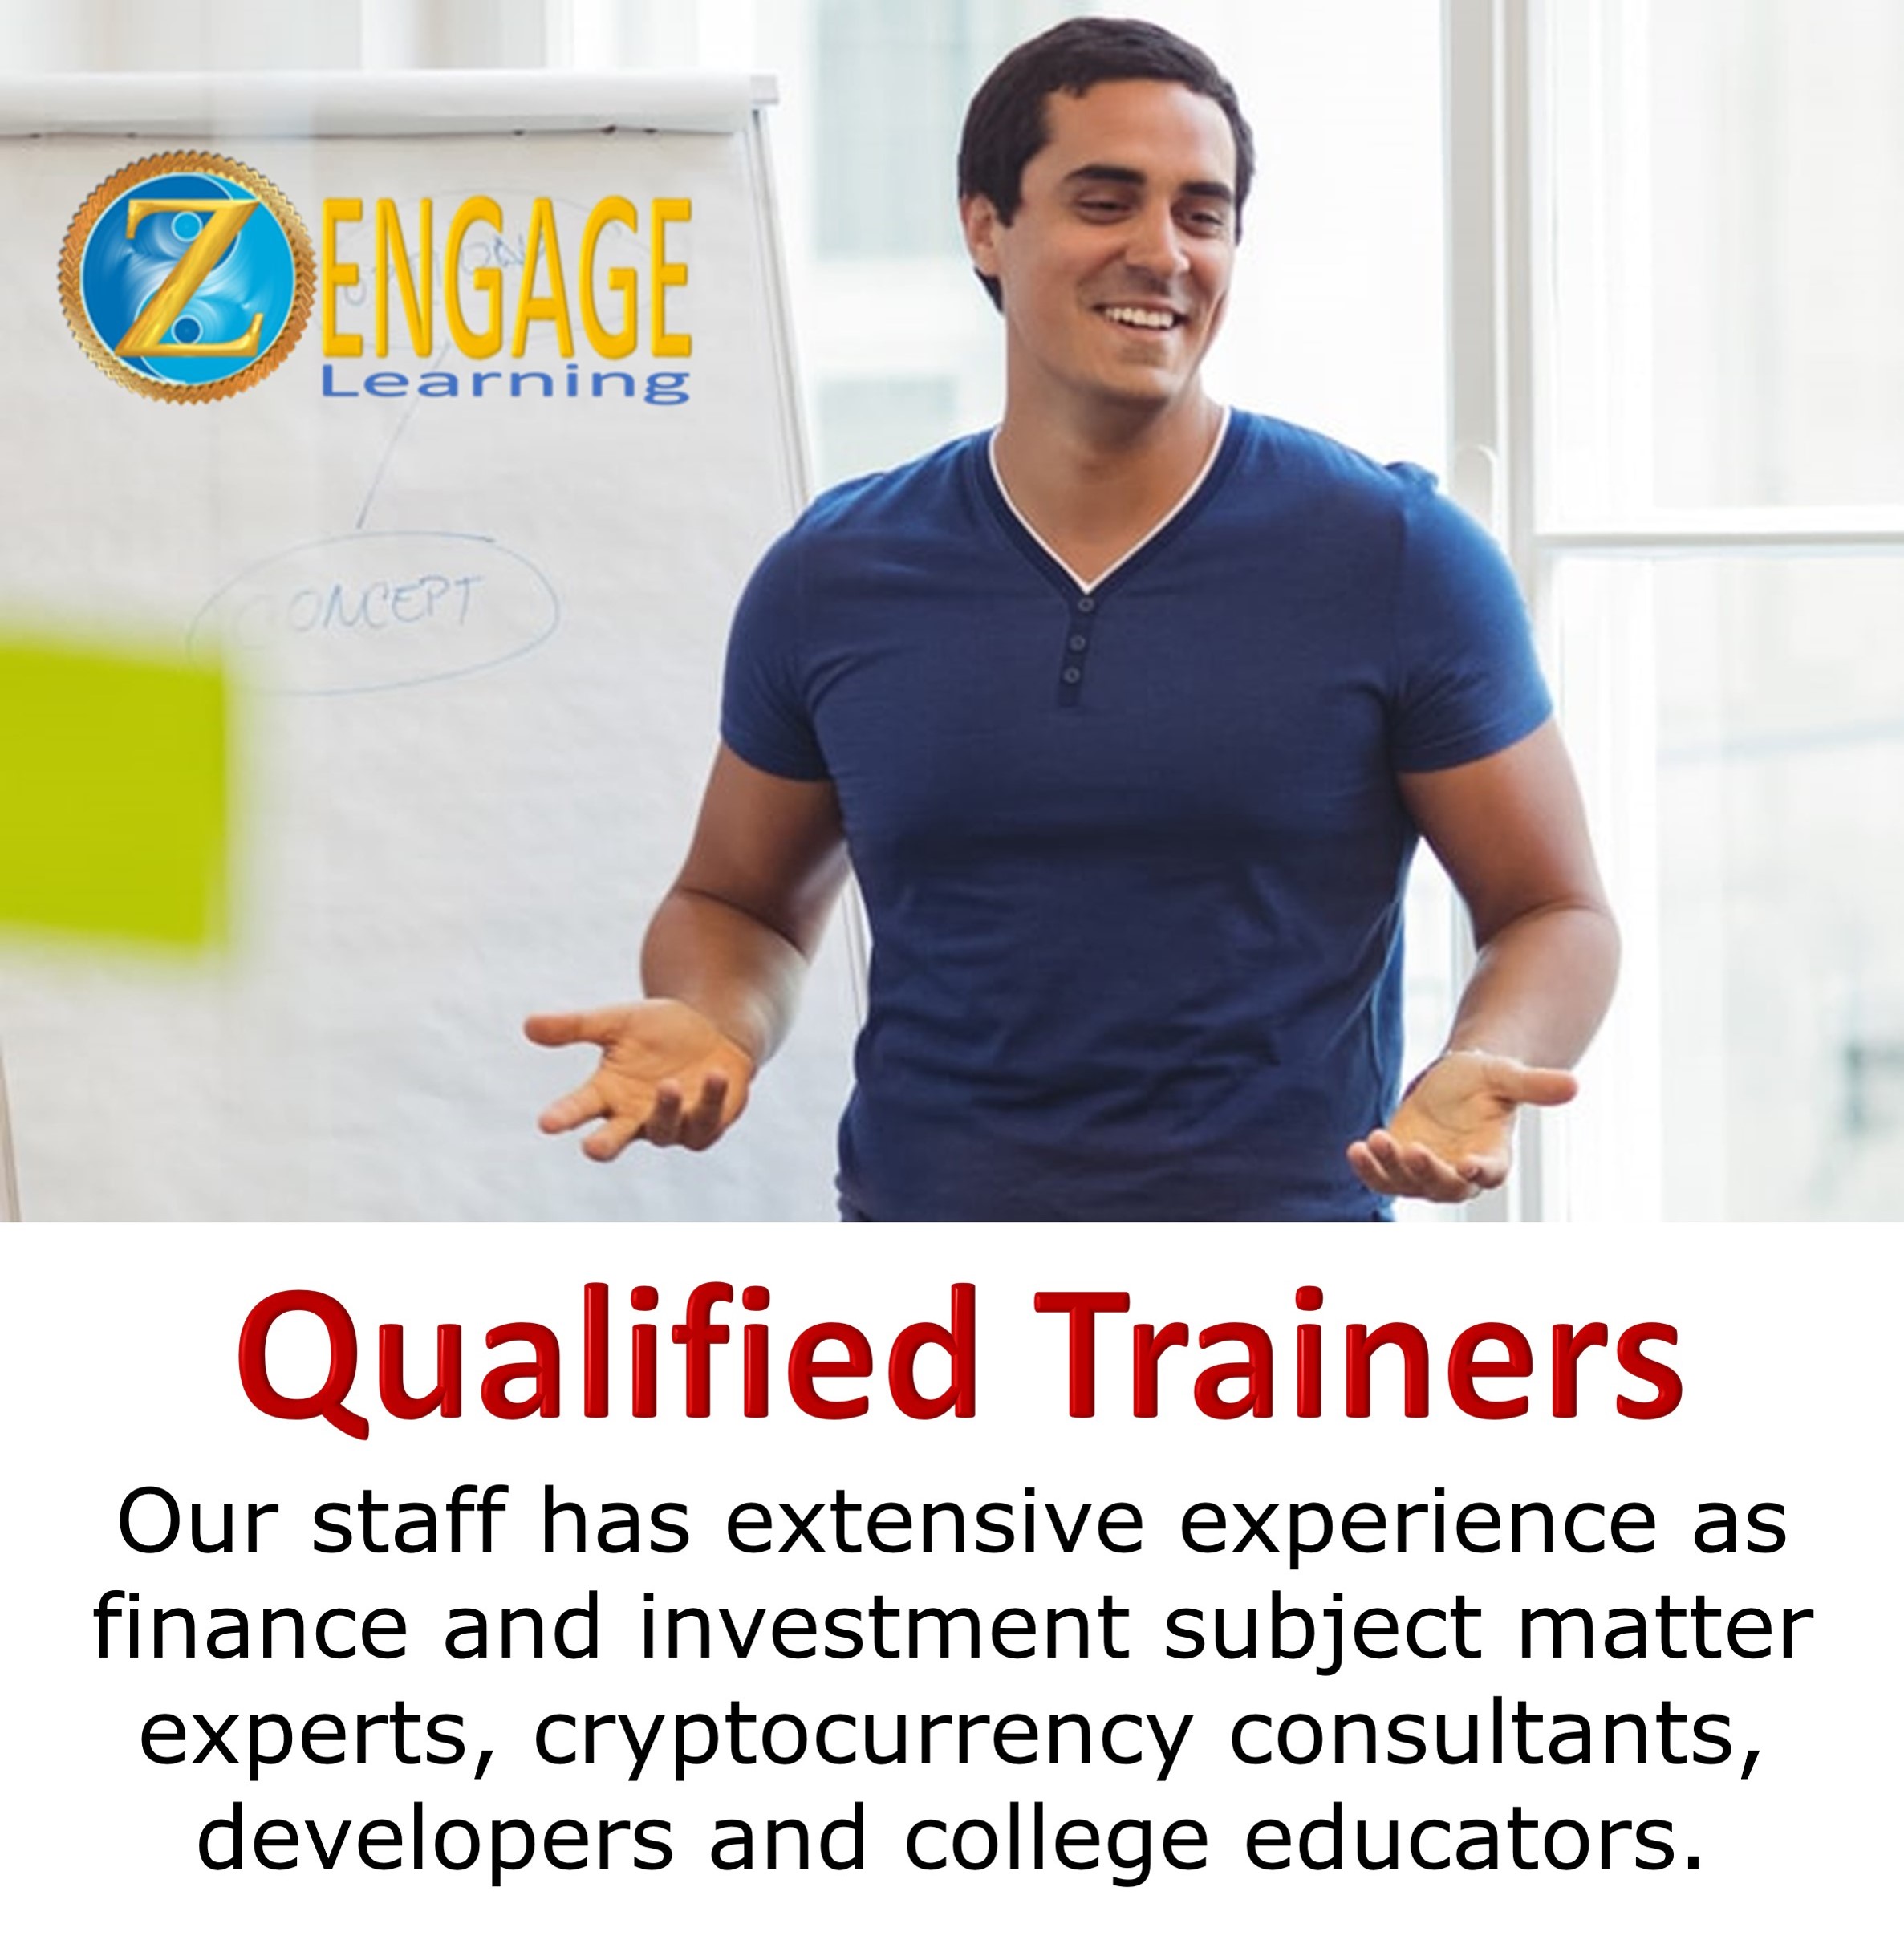 Qualified Trainers